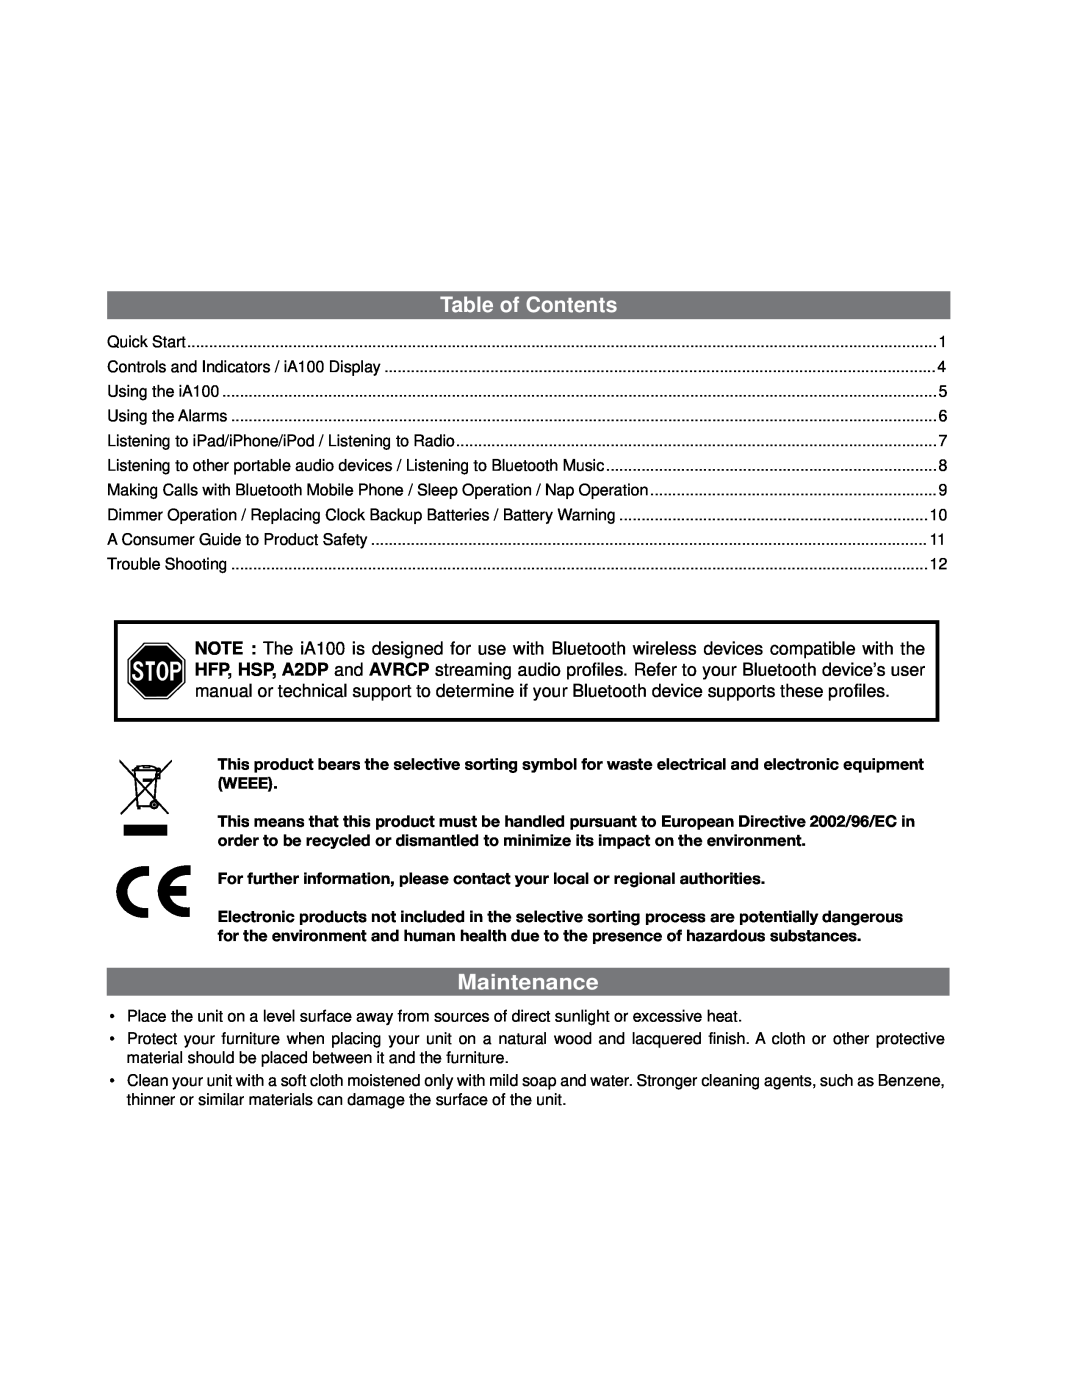 iHome iA100 manual Table of Contents, Maintenance 